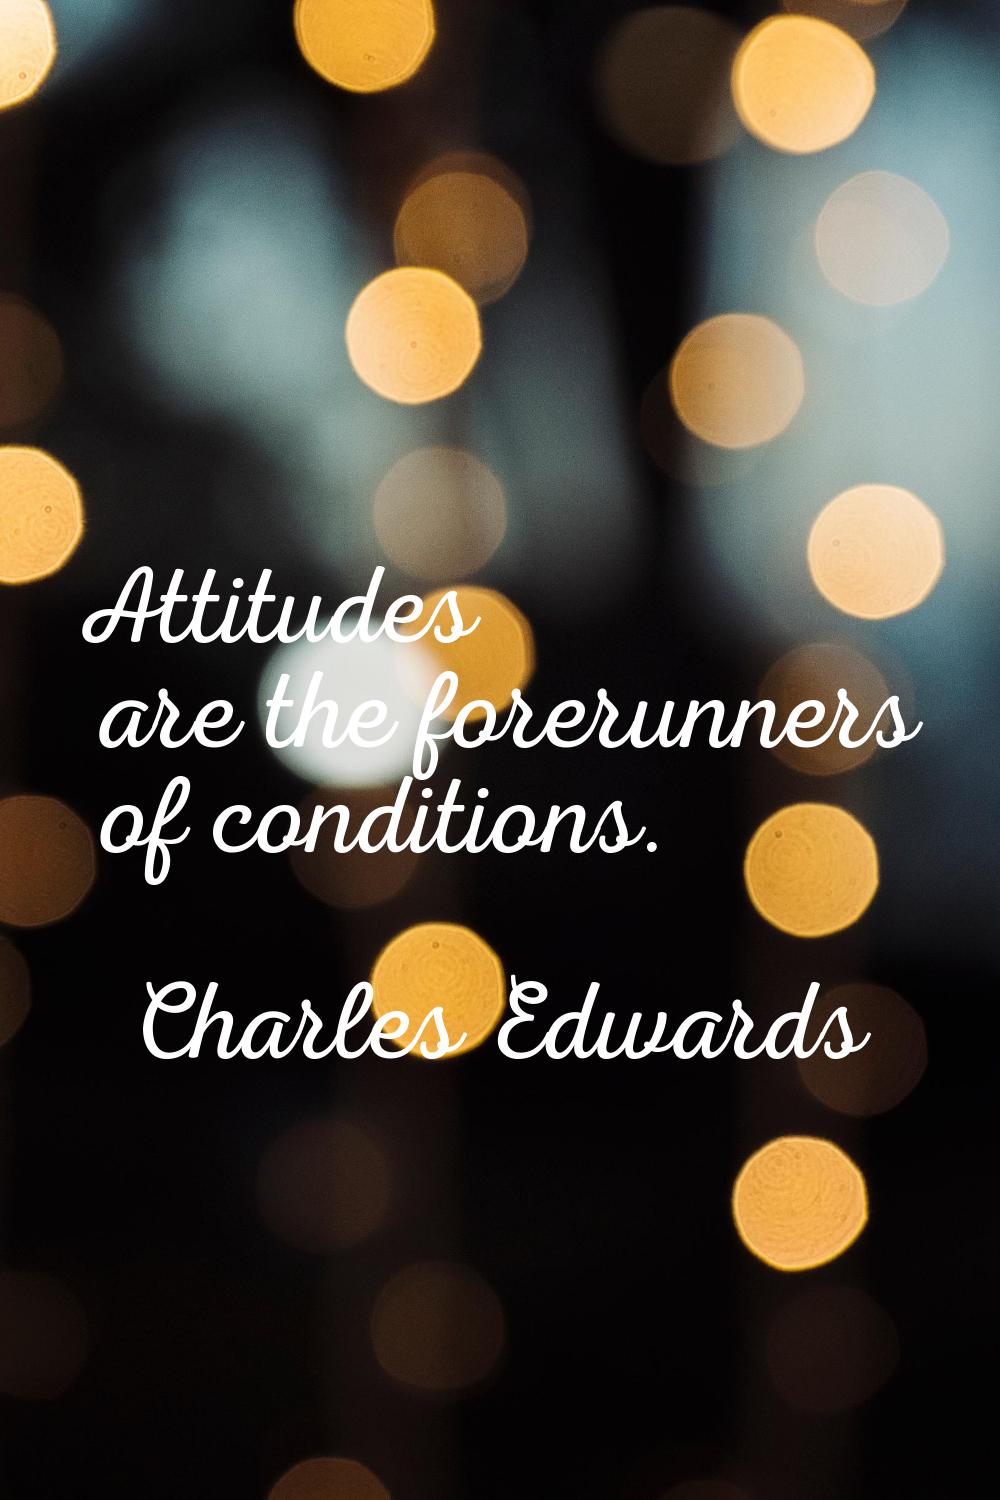 Attitudes are the forerunners of conditions.